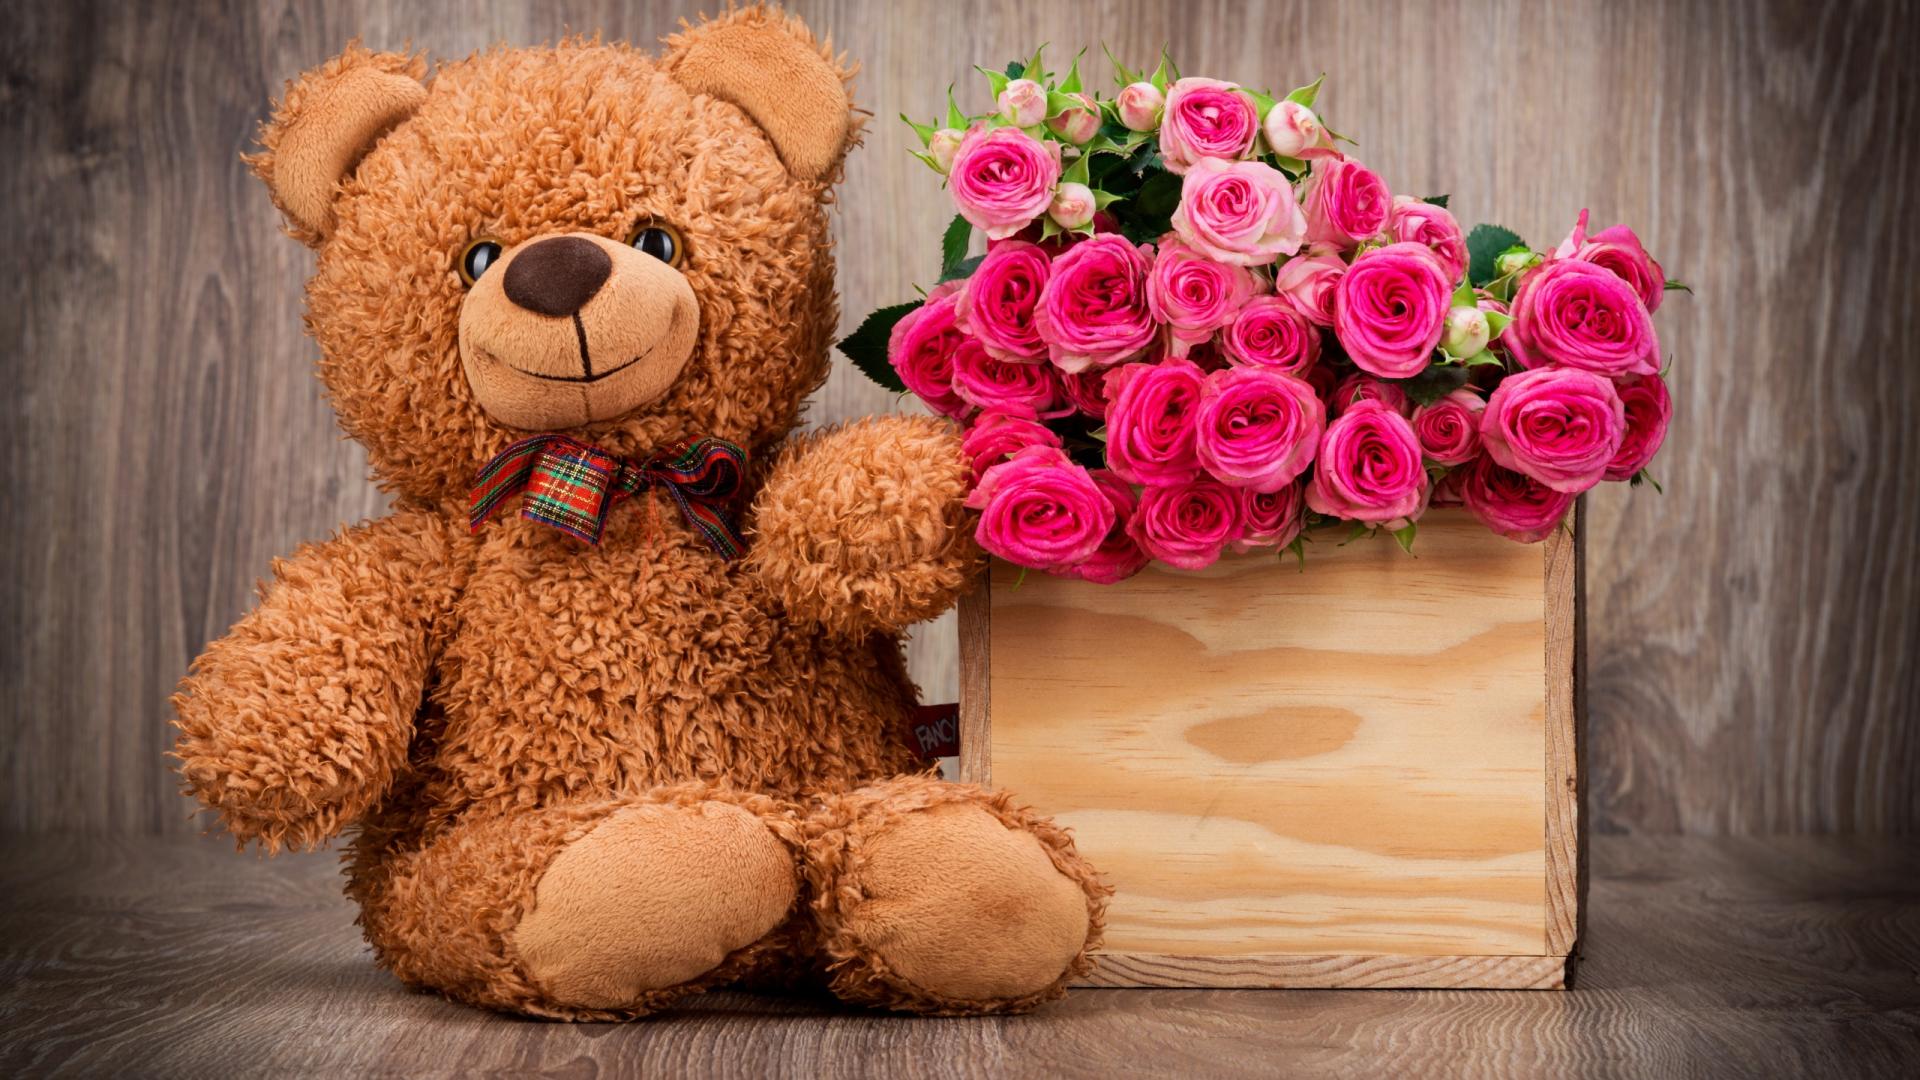 cute teddy bear wallpapers free download for mobile,teddy bear,stuffed toy,toy,pink,plush